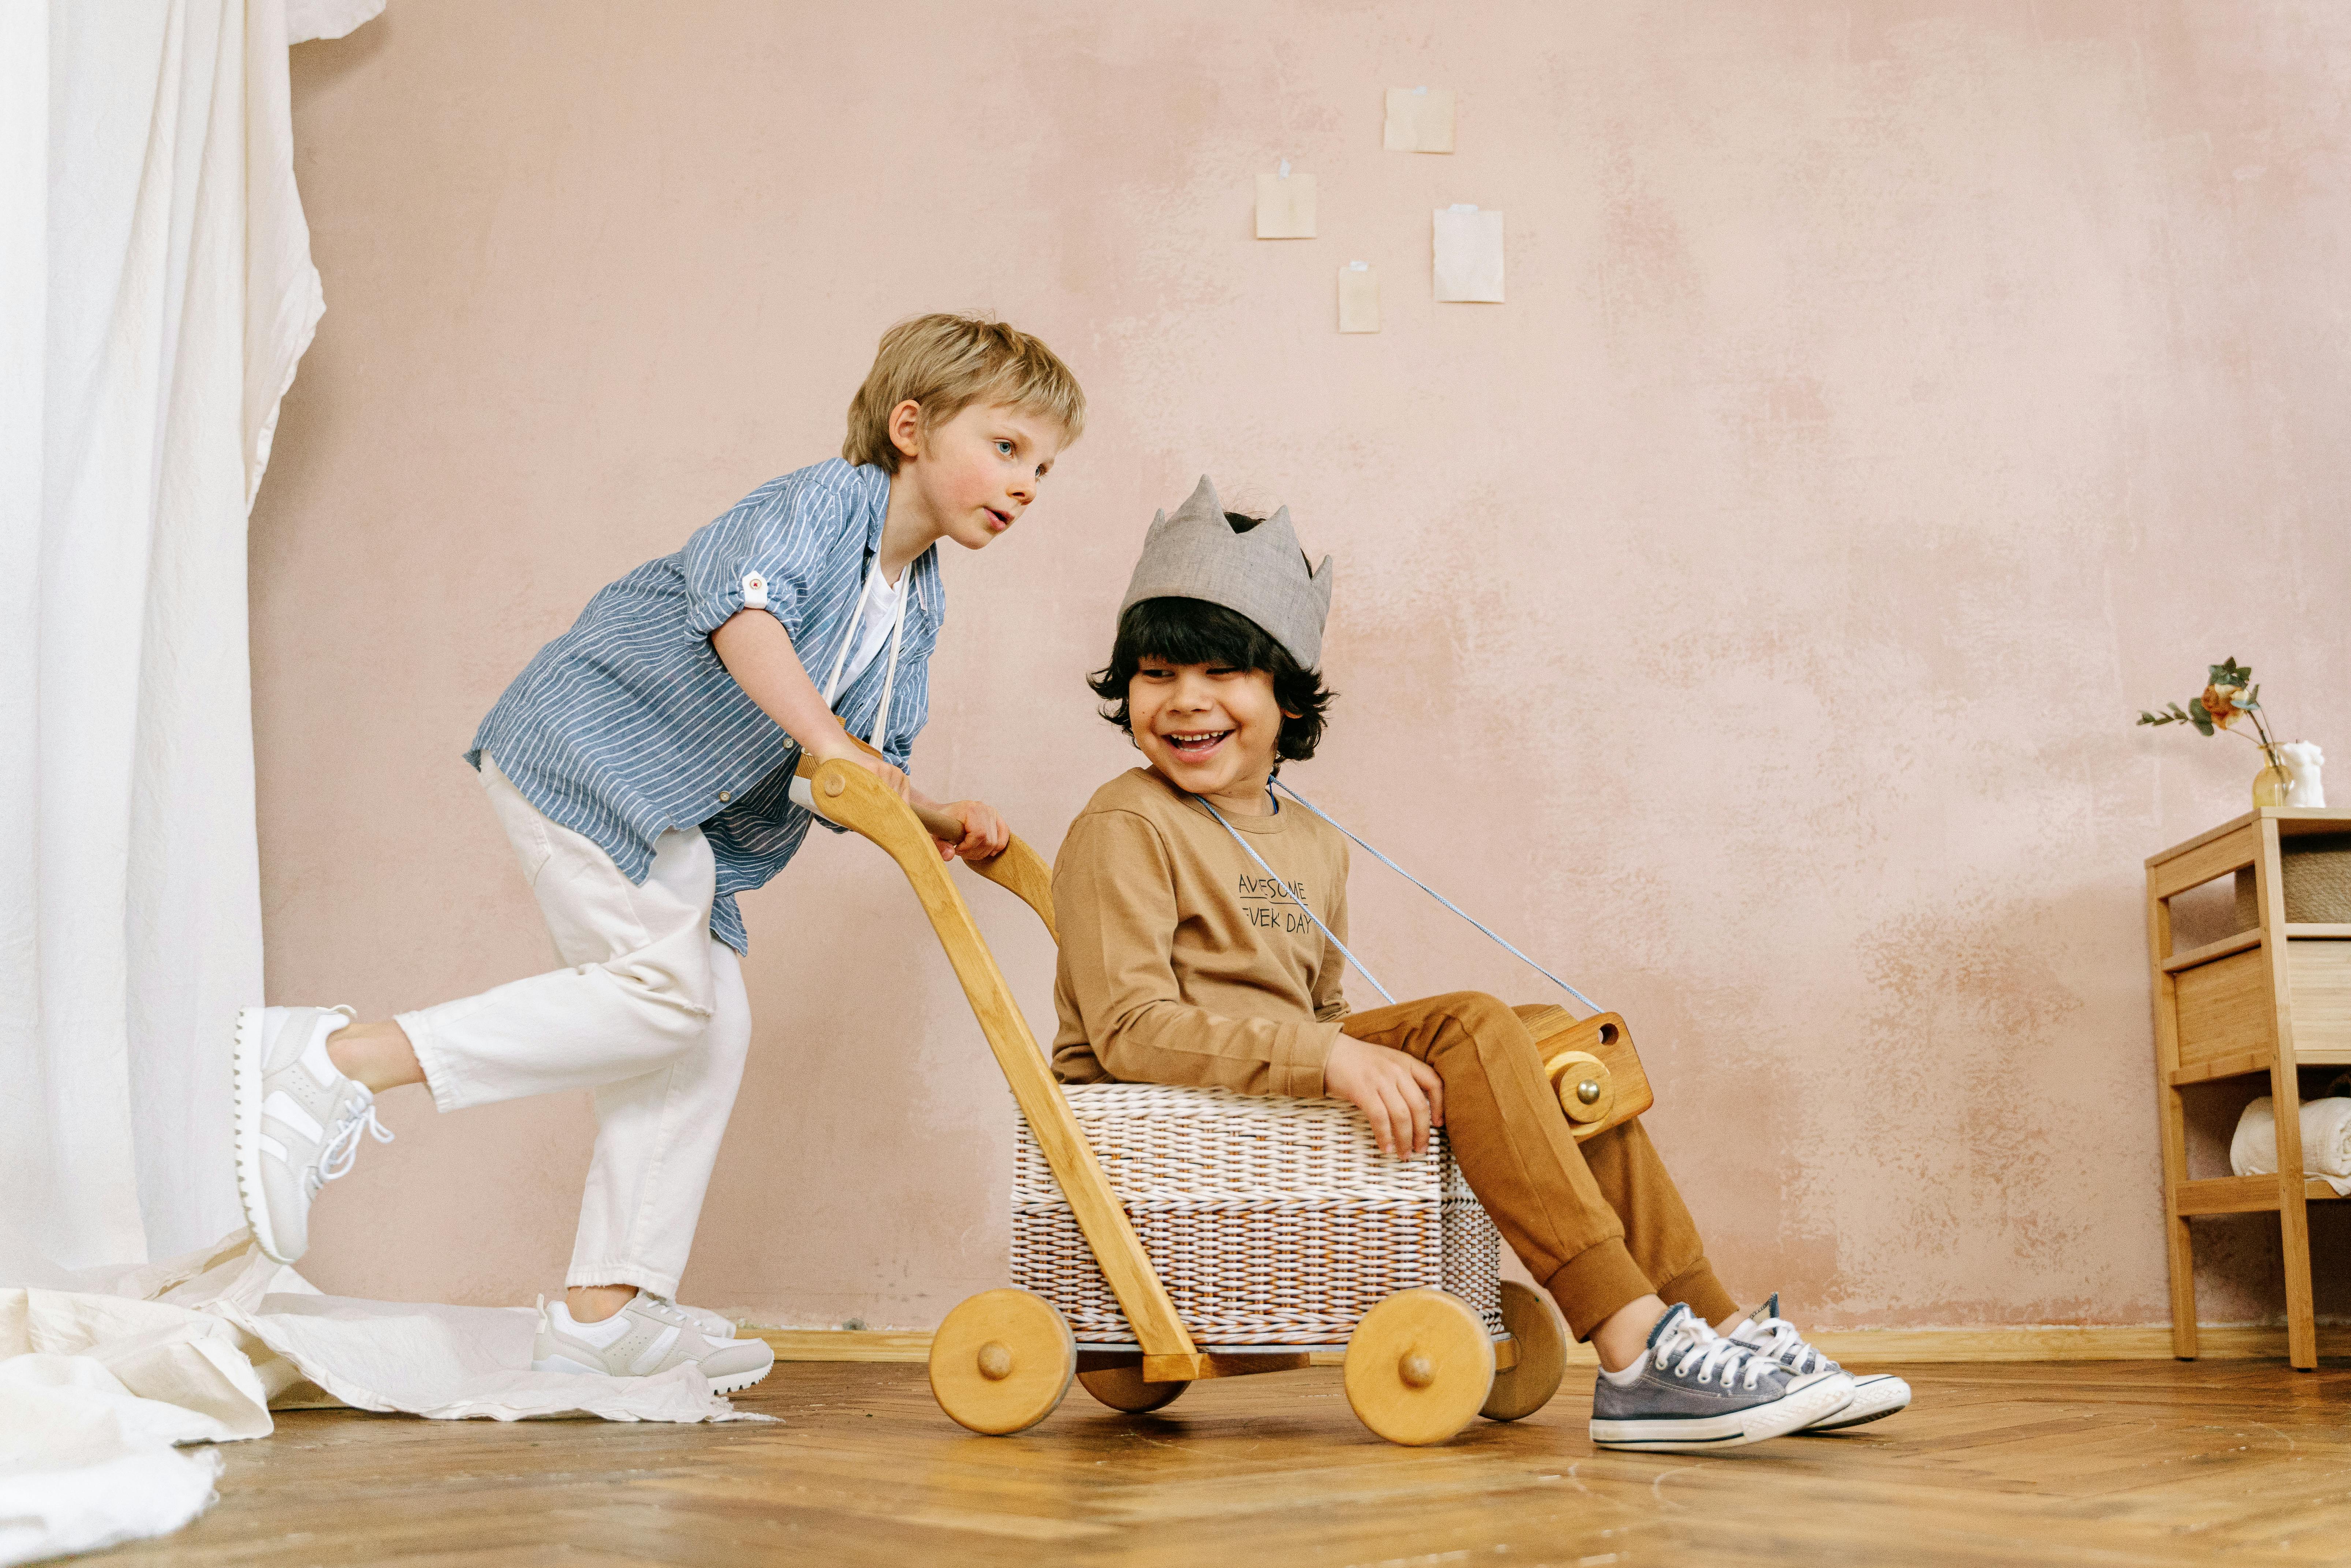 Little boys playing indoors | Source: Pexels